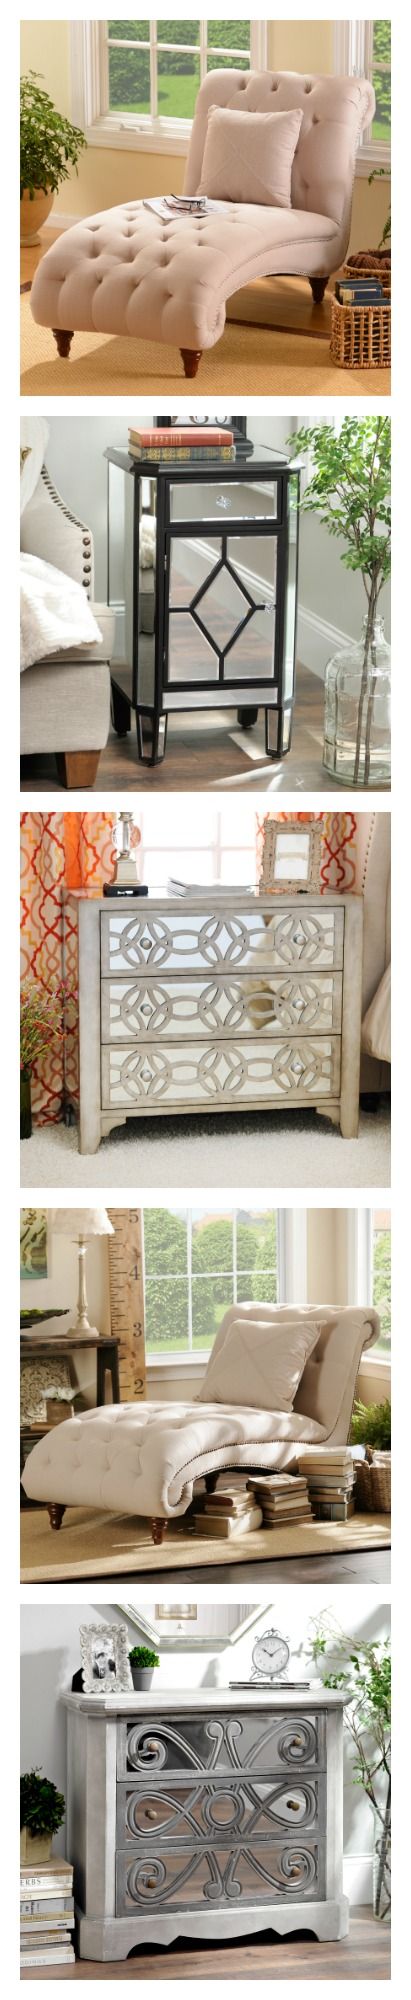 furniture wondrous kirklands chic comfort your kirkland knoxville wichita locations skinny storage cabinet dist metal accent table black and white decorations rustic square coffee